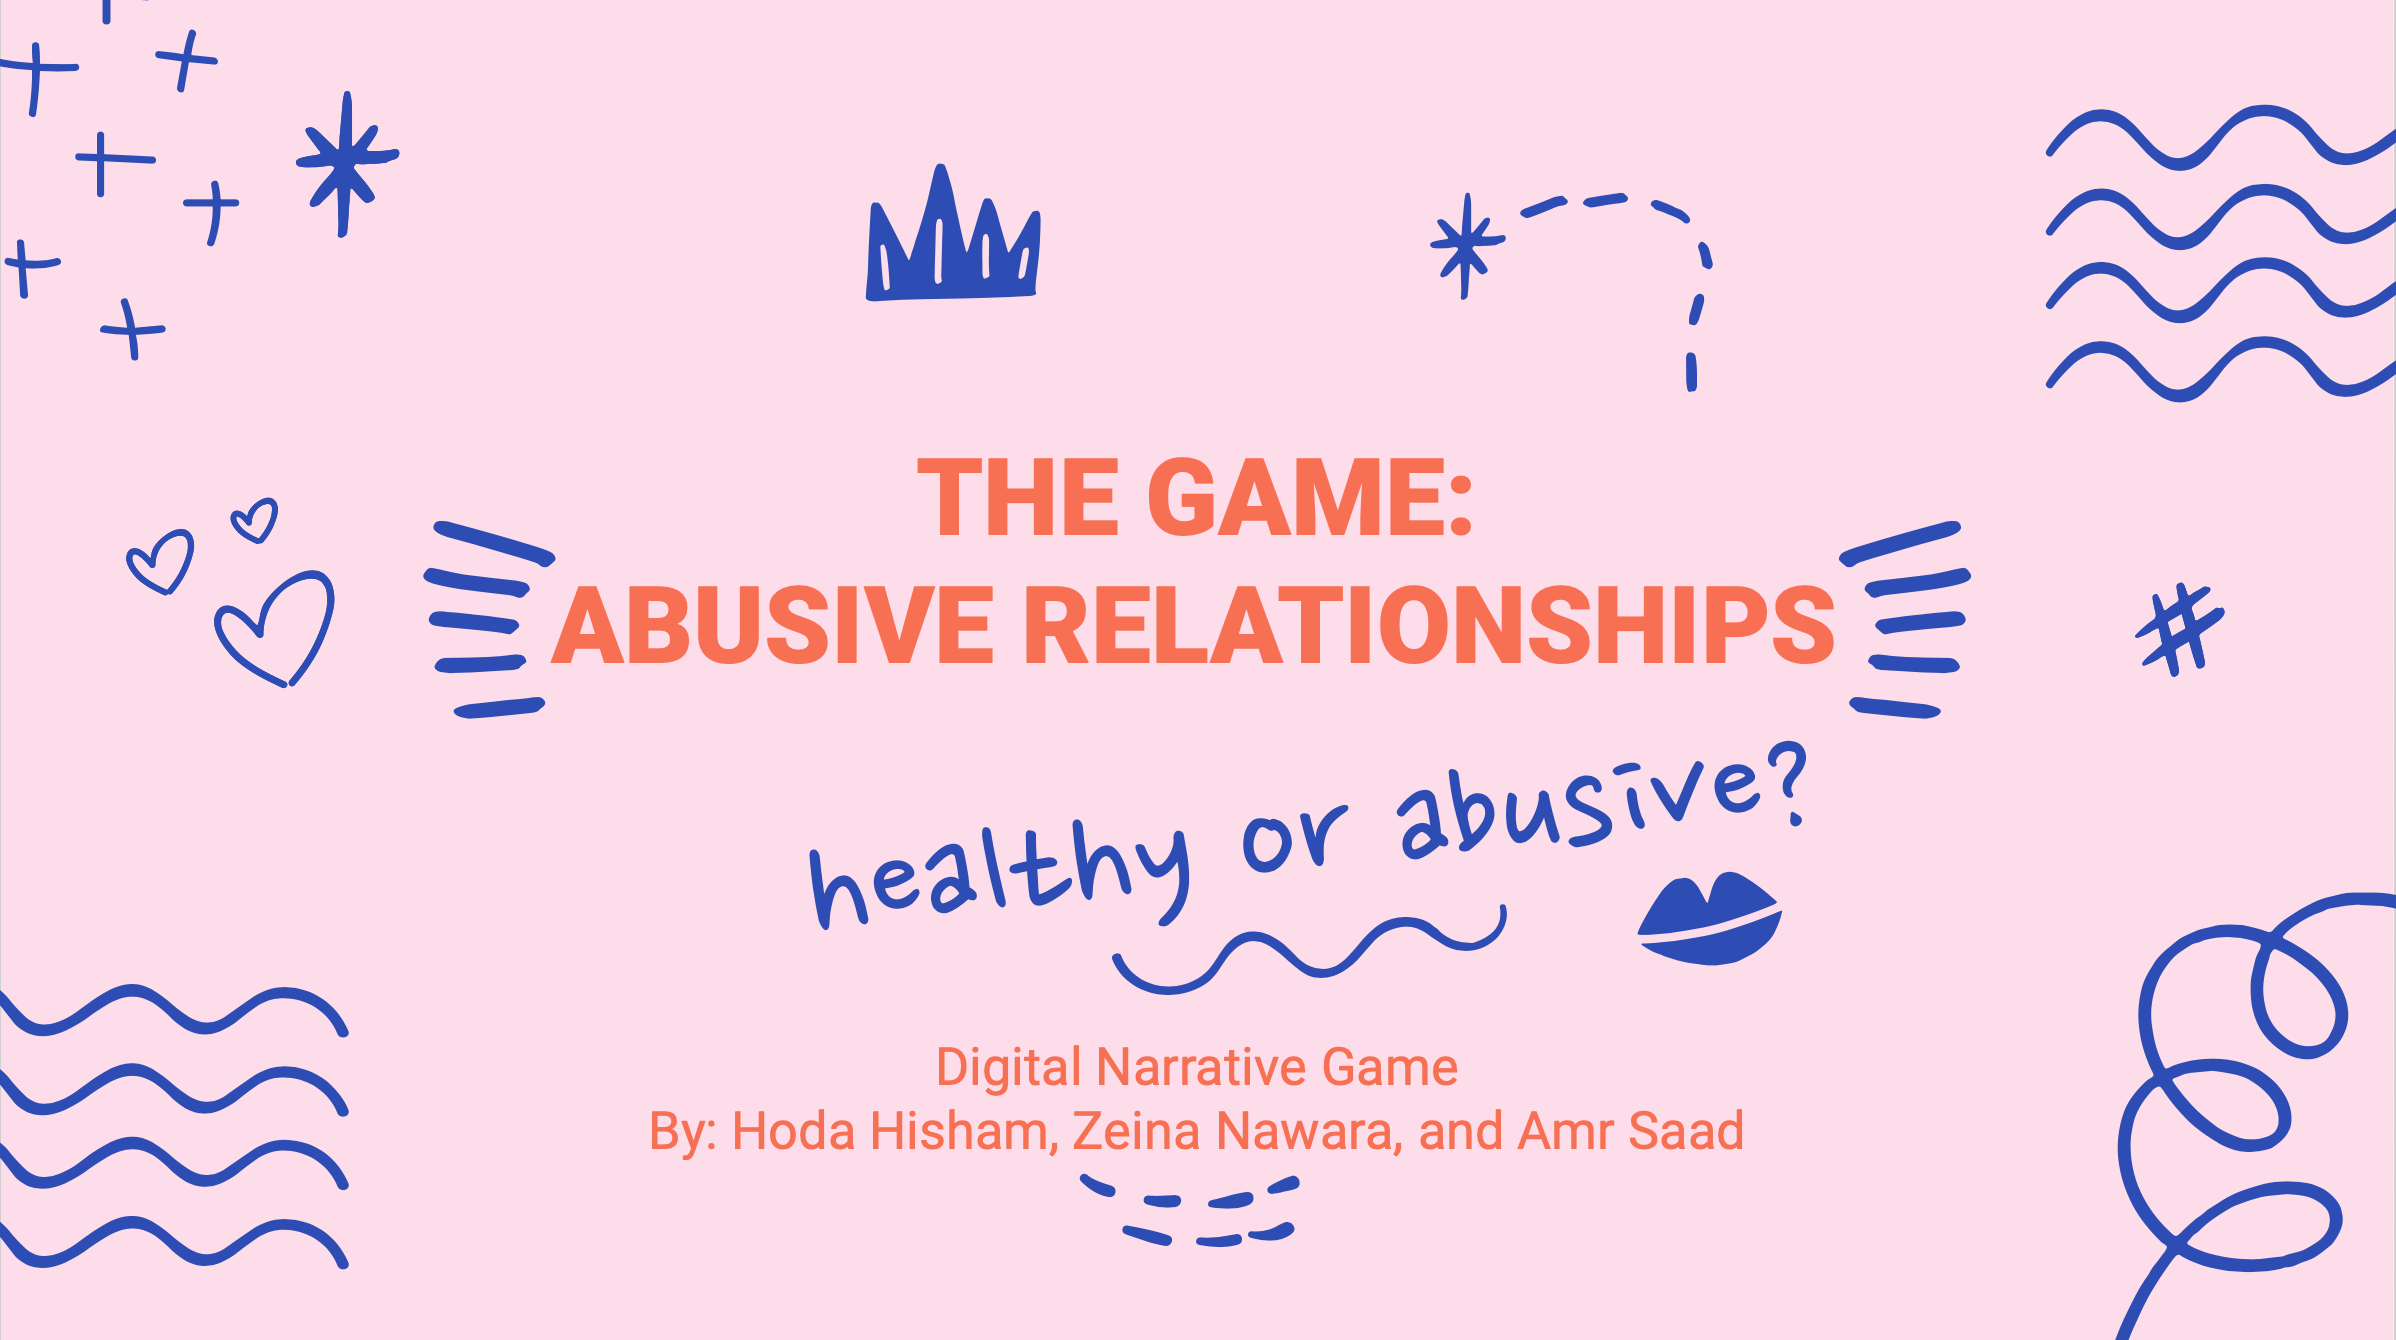 The Game: Abusive Relationships